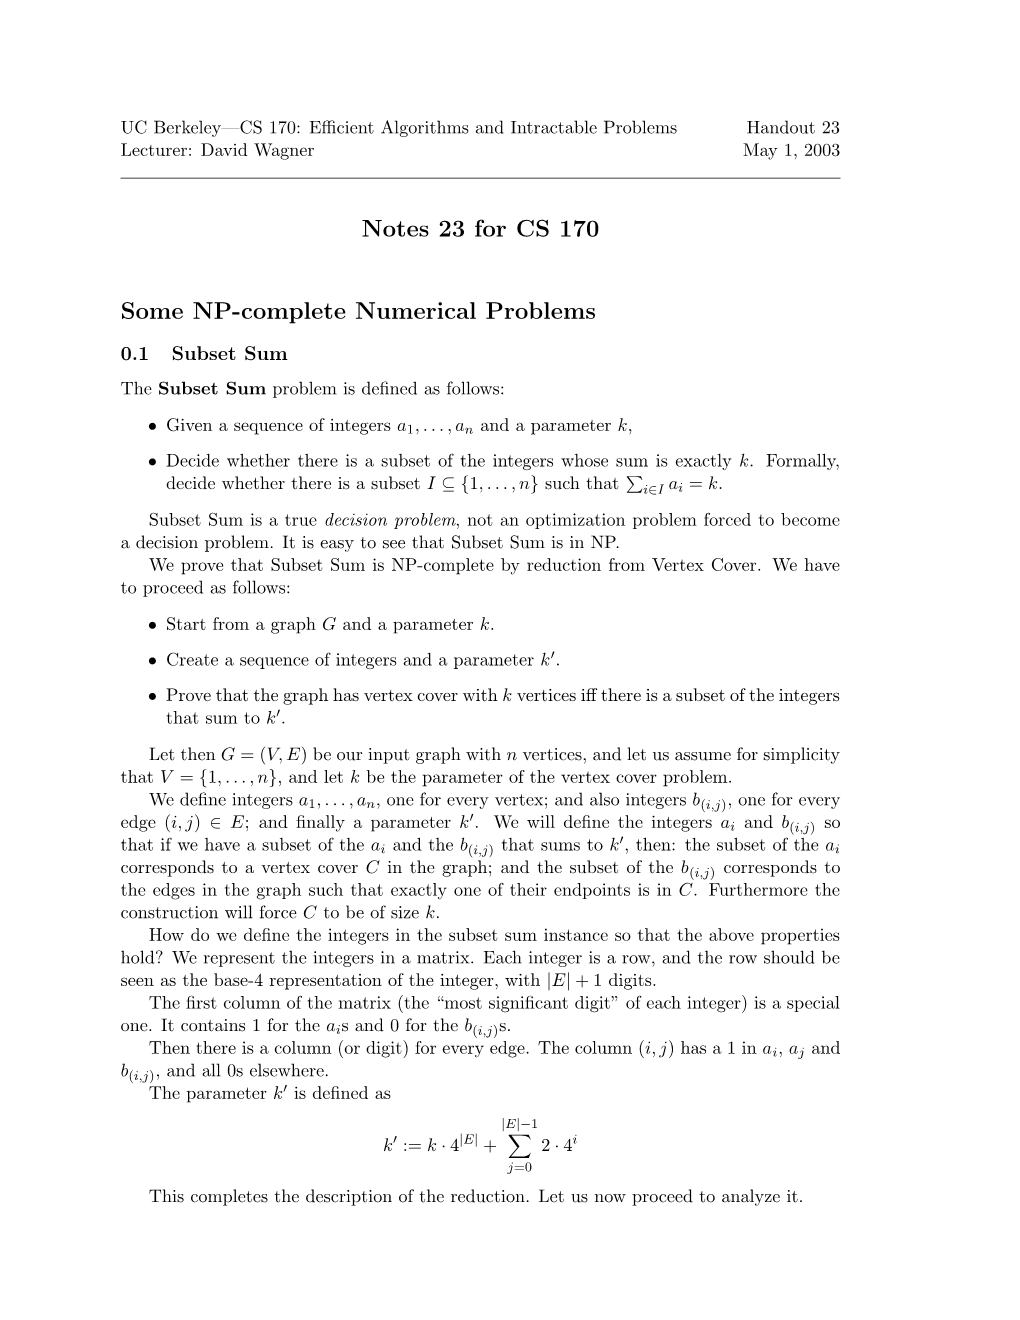 Notes 23 for CS 170 Some NP-Complete Numerical Problems